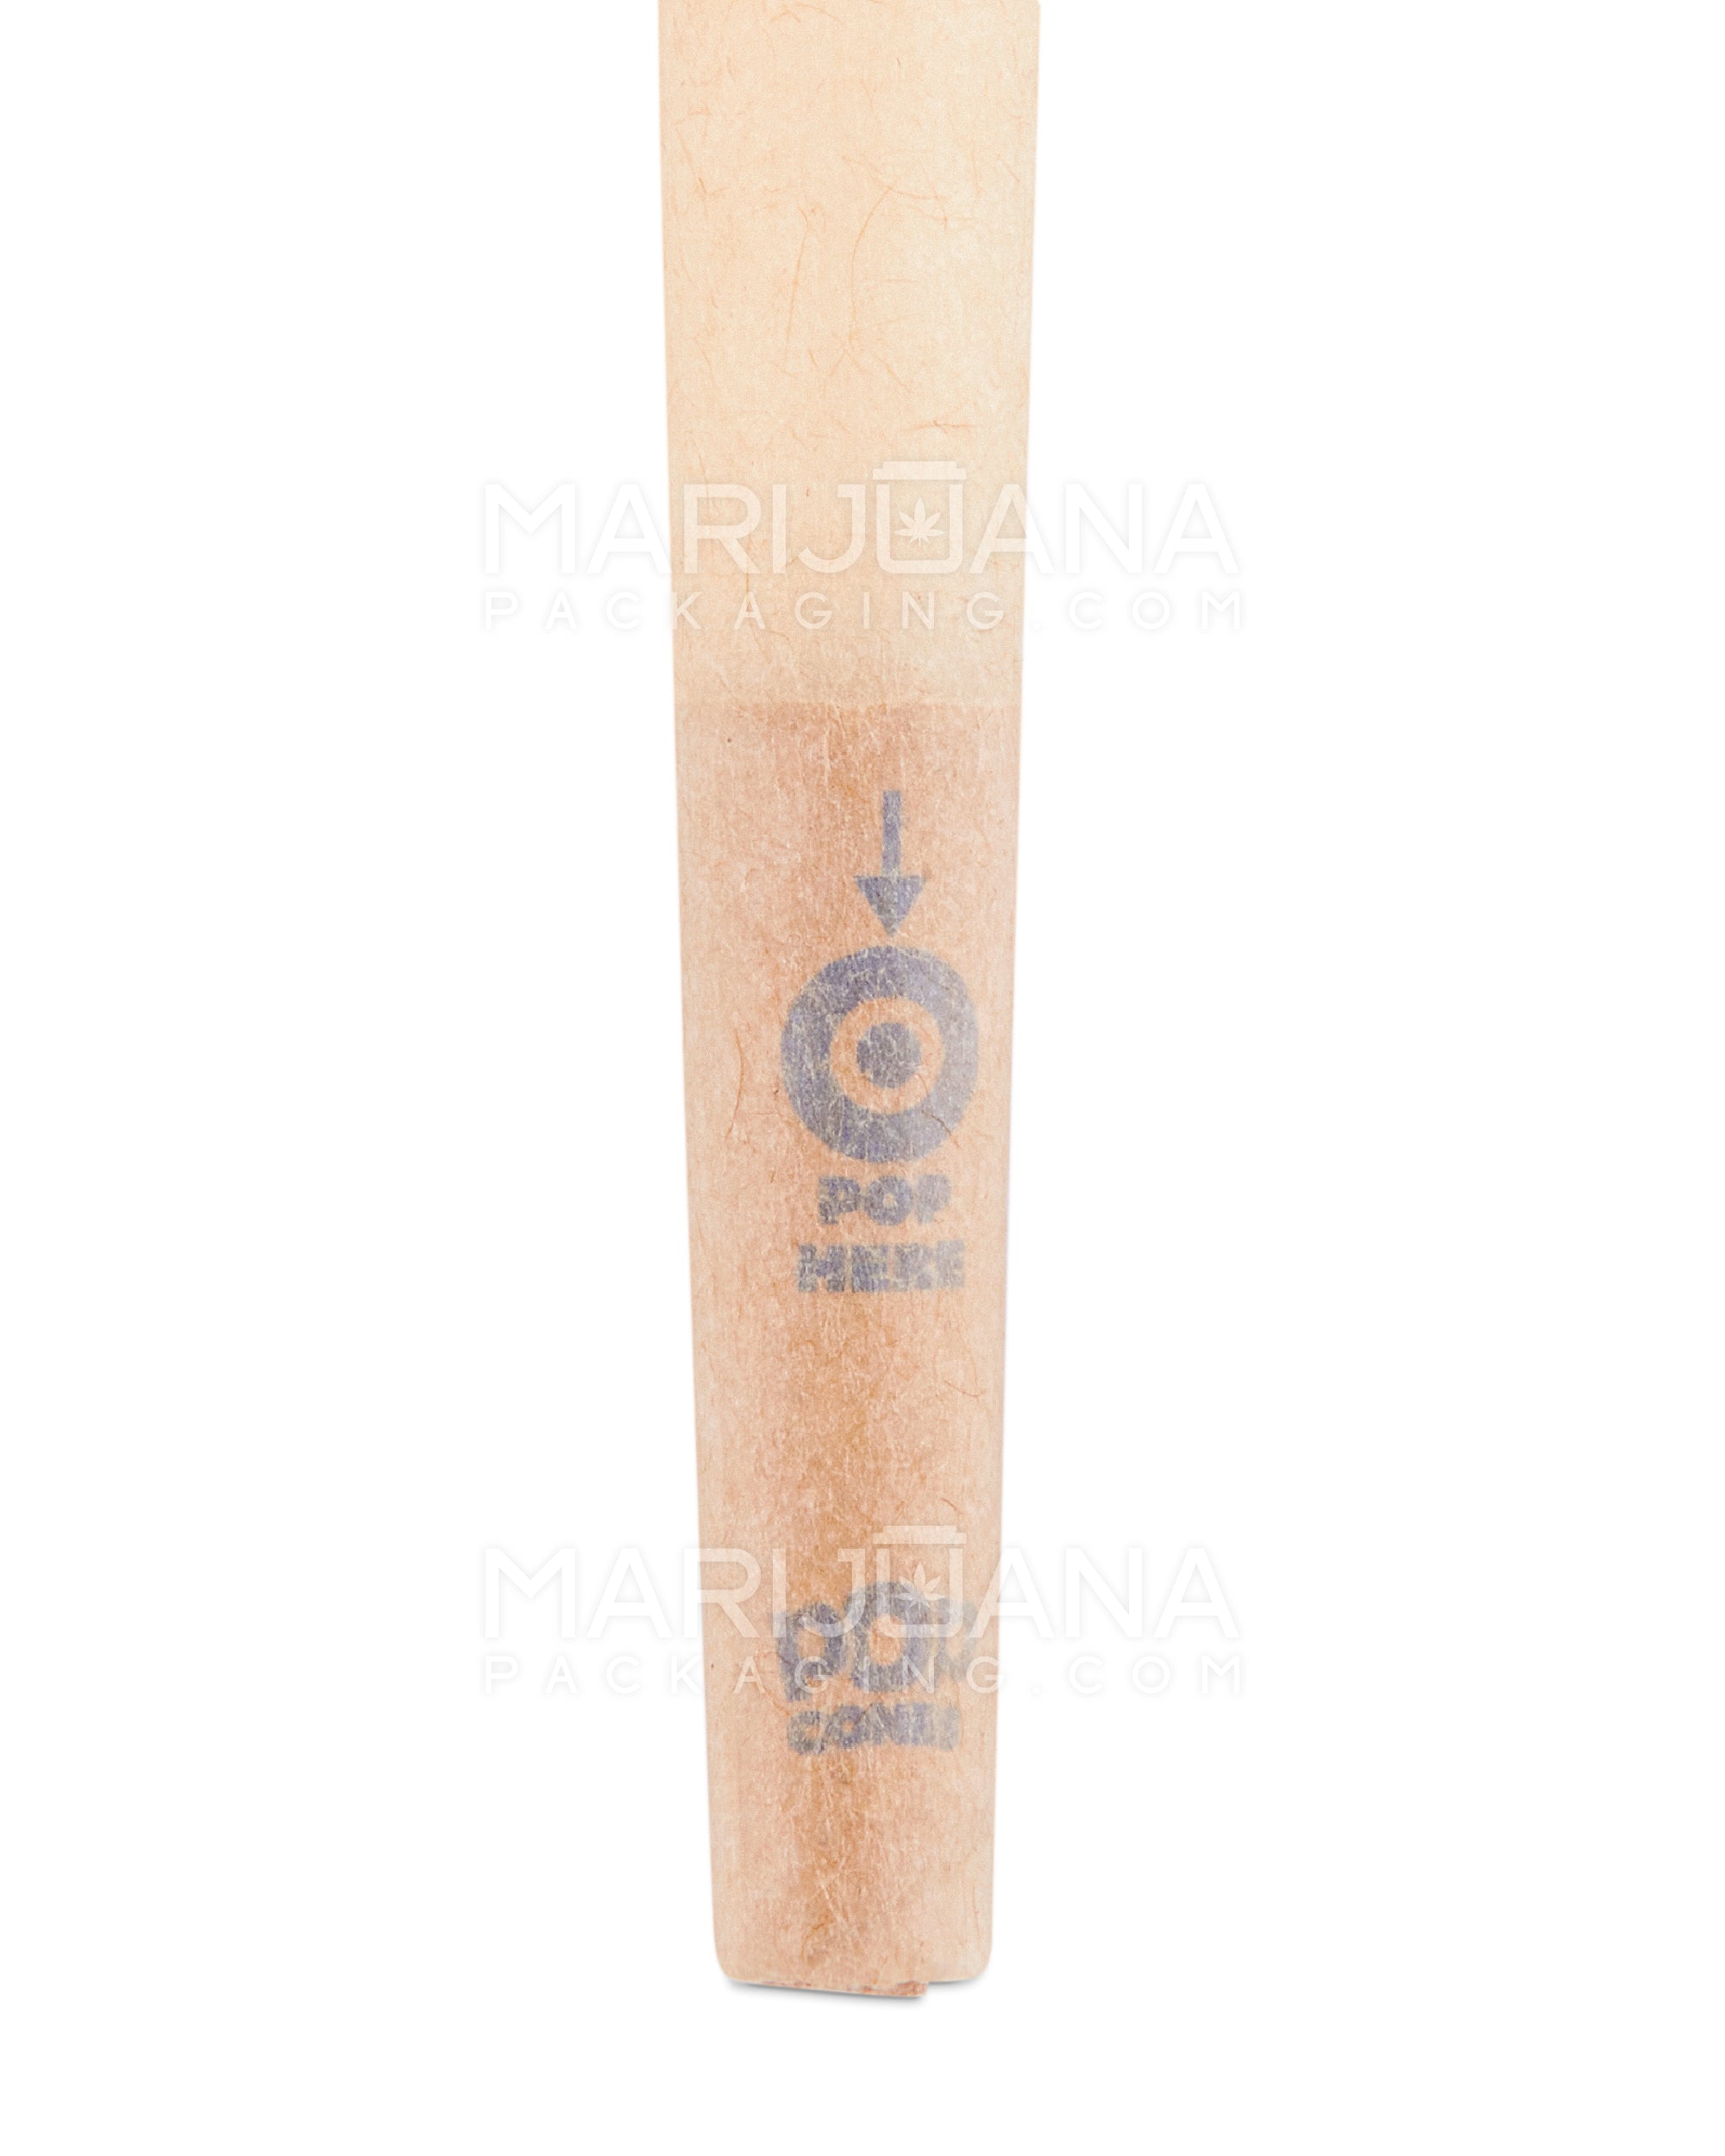 POP CONES | 1 1/4 Size Unbleached Pre-Rolled Cones | 84mm - Super Sweet - 400 Count - 5